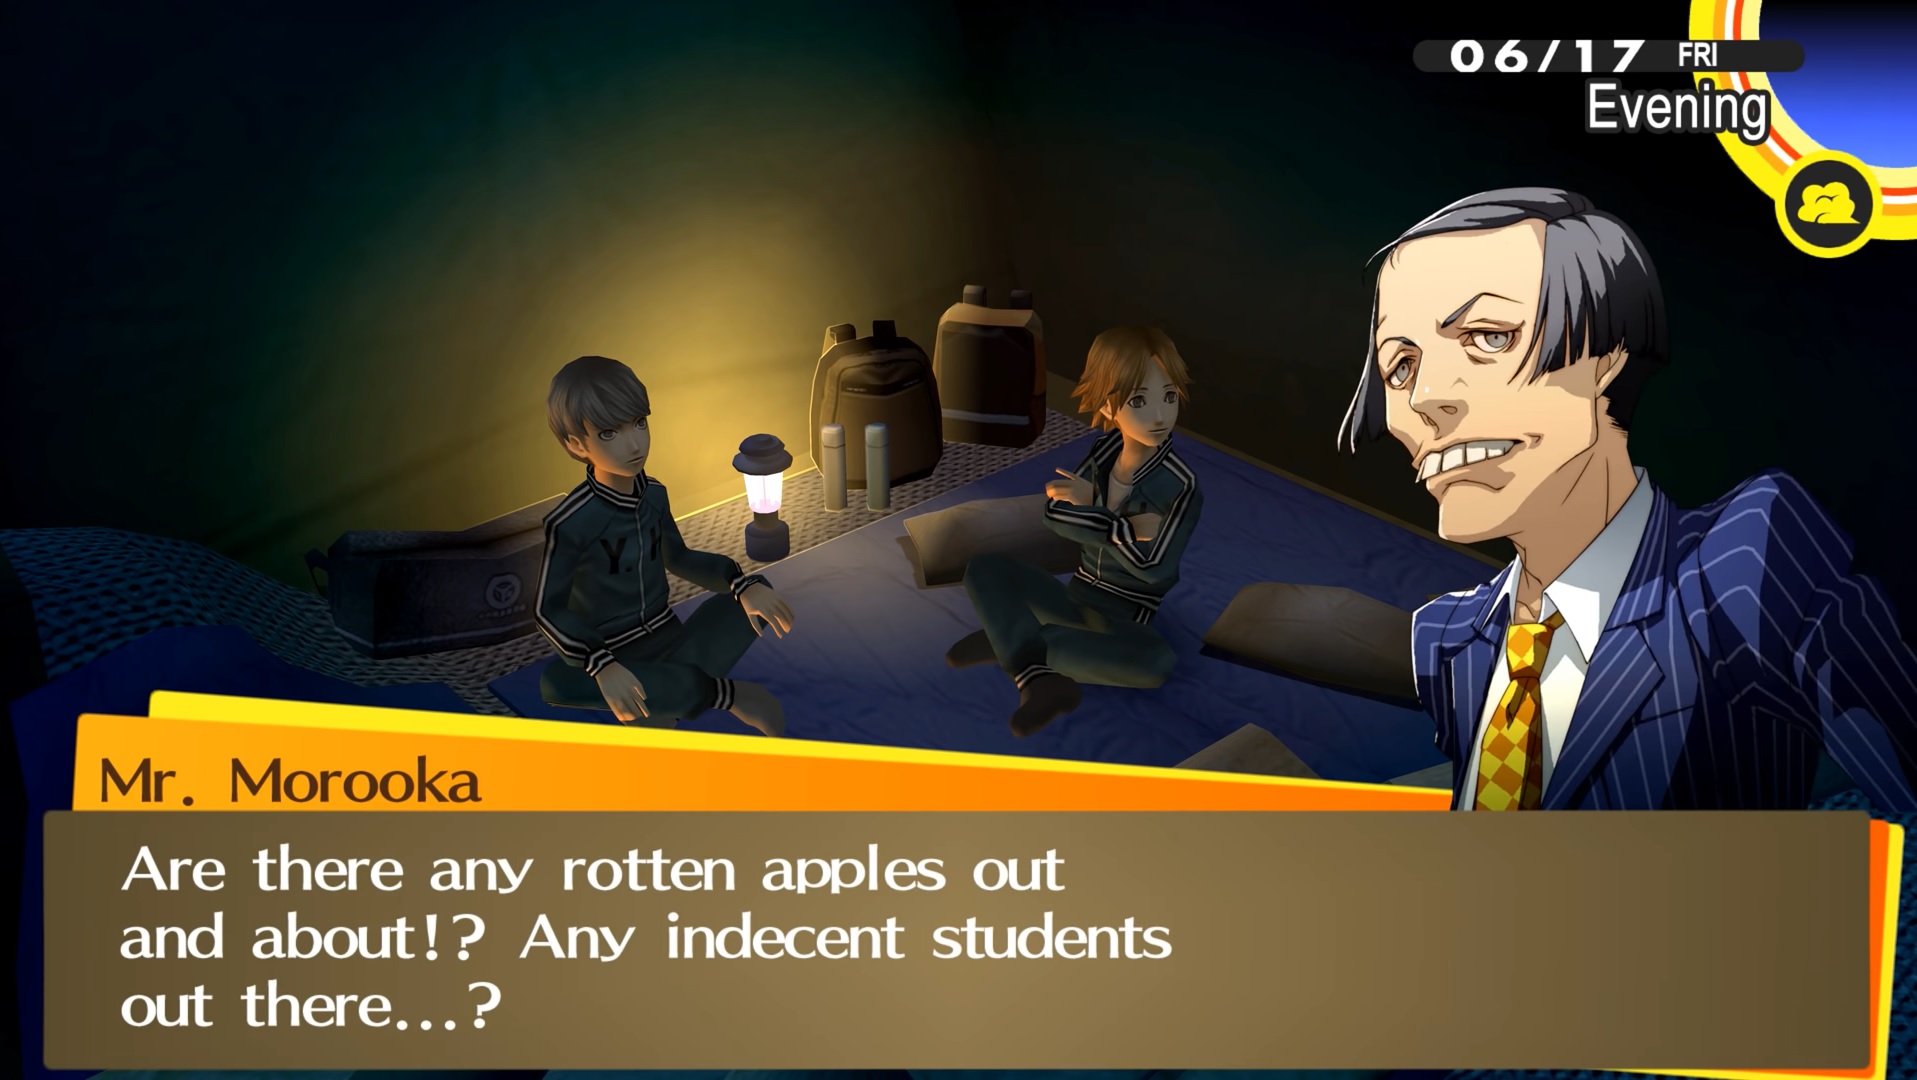 Persona 4 mod removing “cringe” events sparks controversy